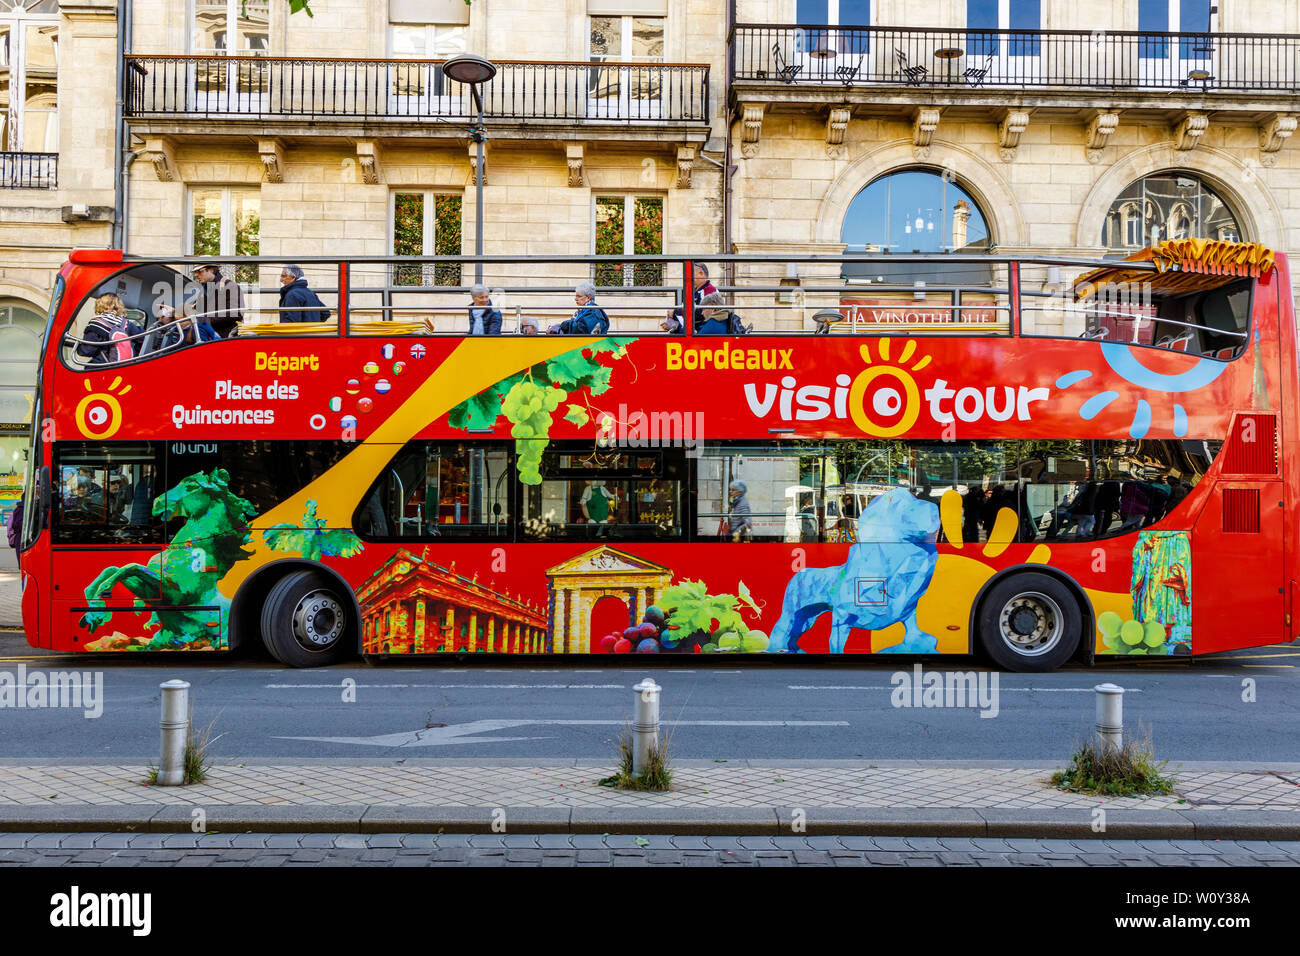 Red open topped Hop-On Hop-Off tourist bus in the city of Bordeaux, in the Gironde department in Southwestern France. Stock Photo